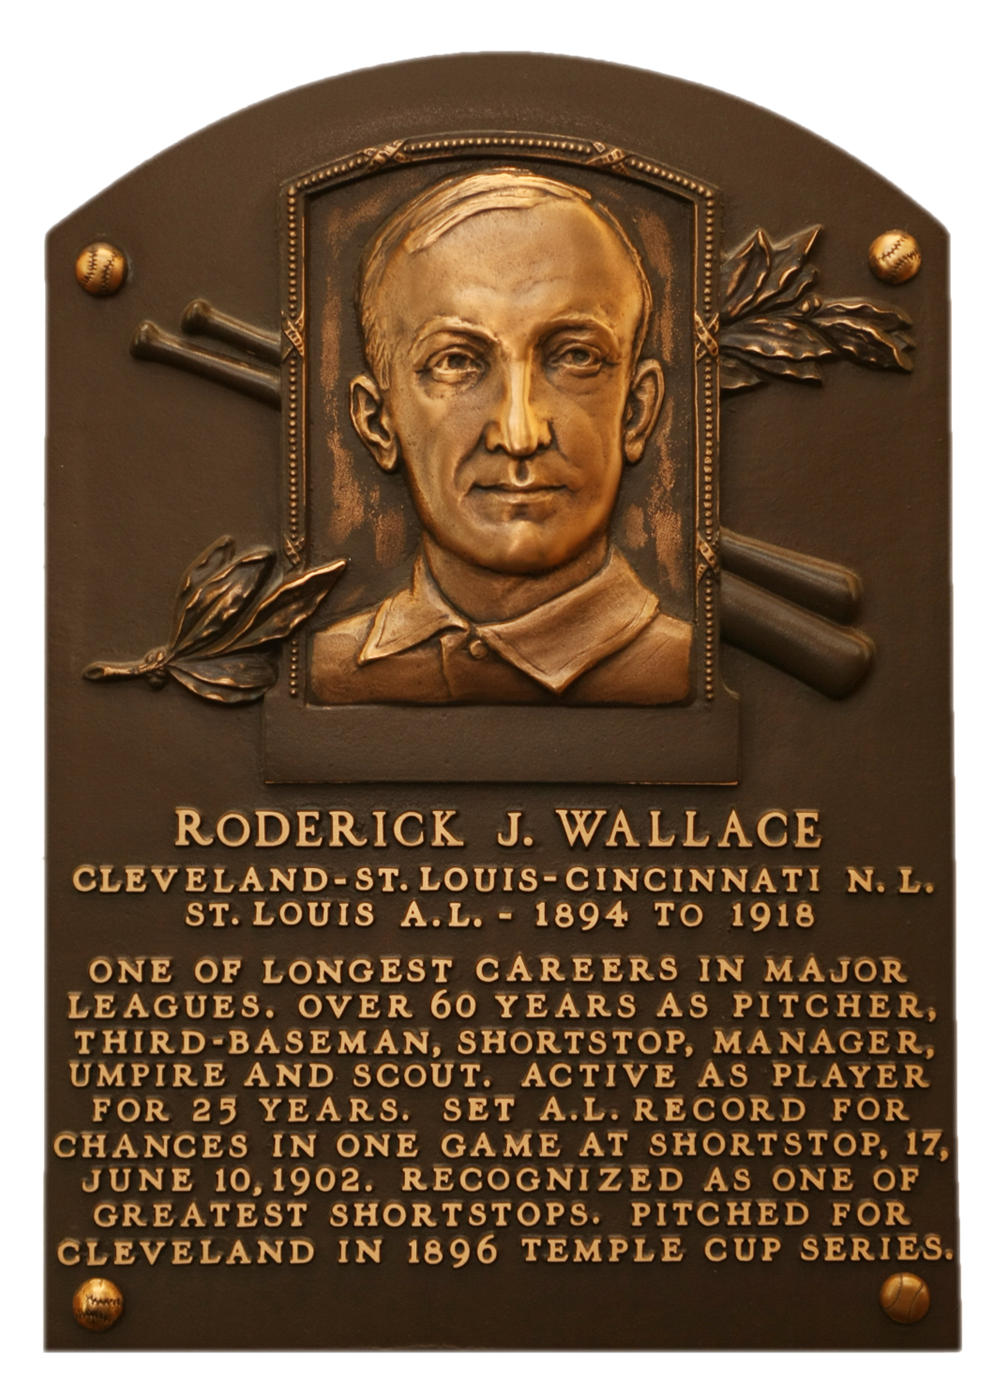 Bobby Wallace Hall of Fame plaque